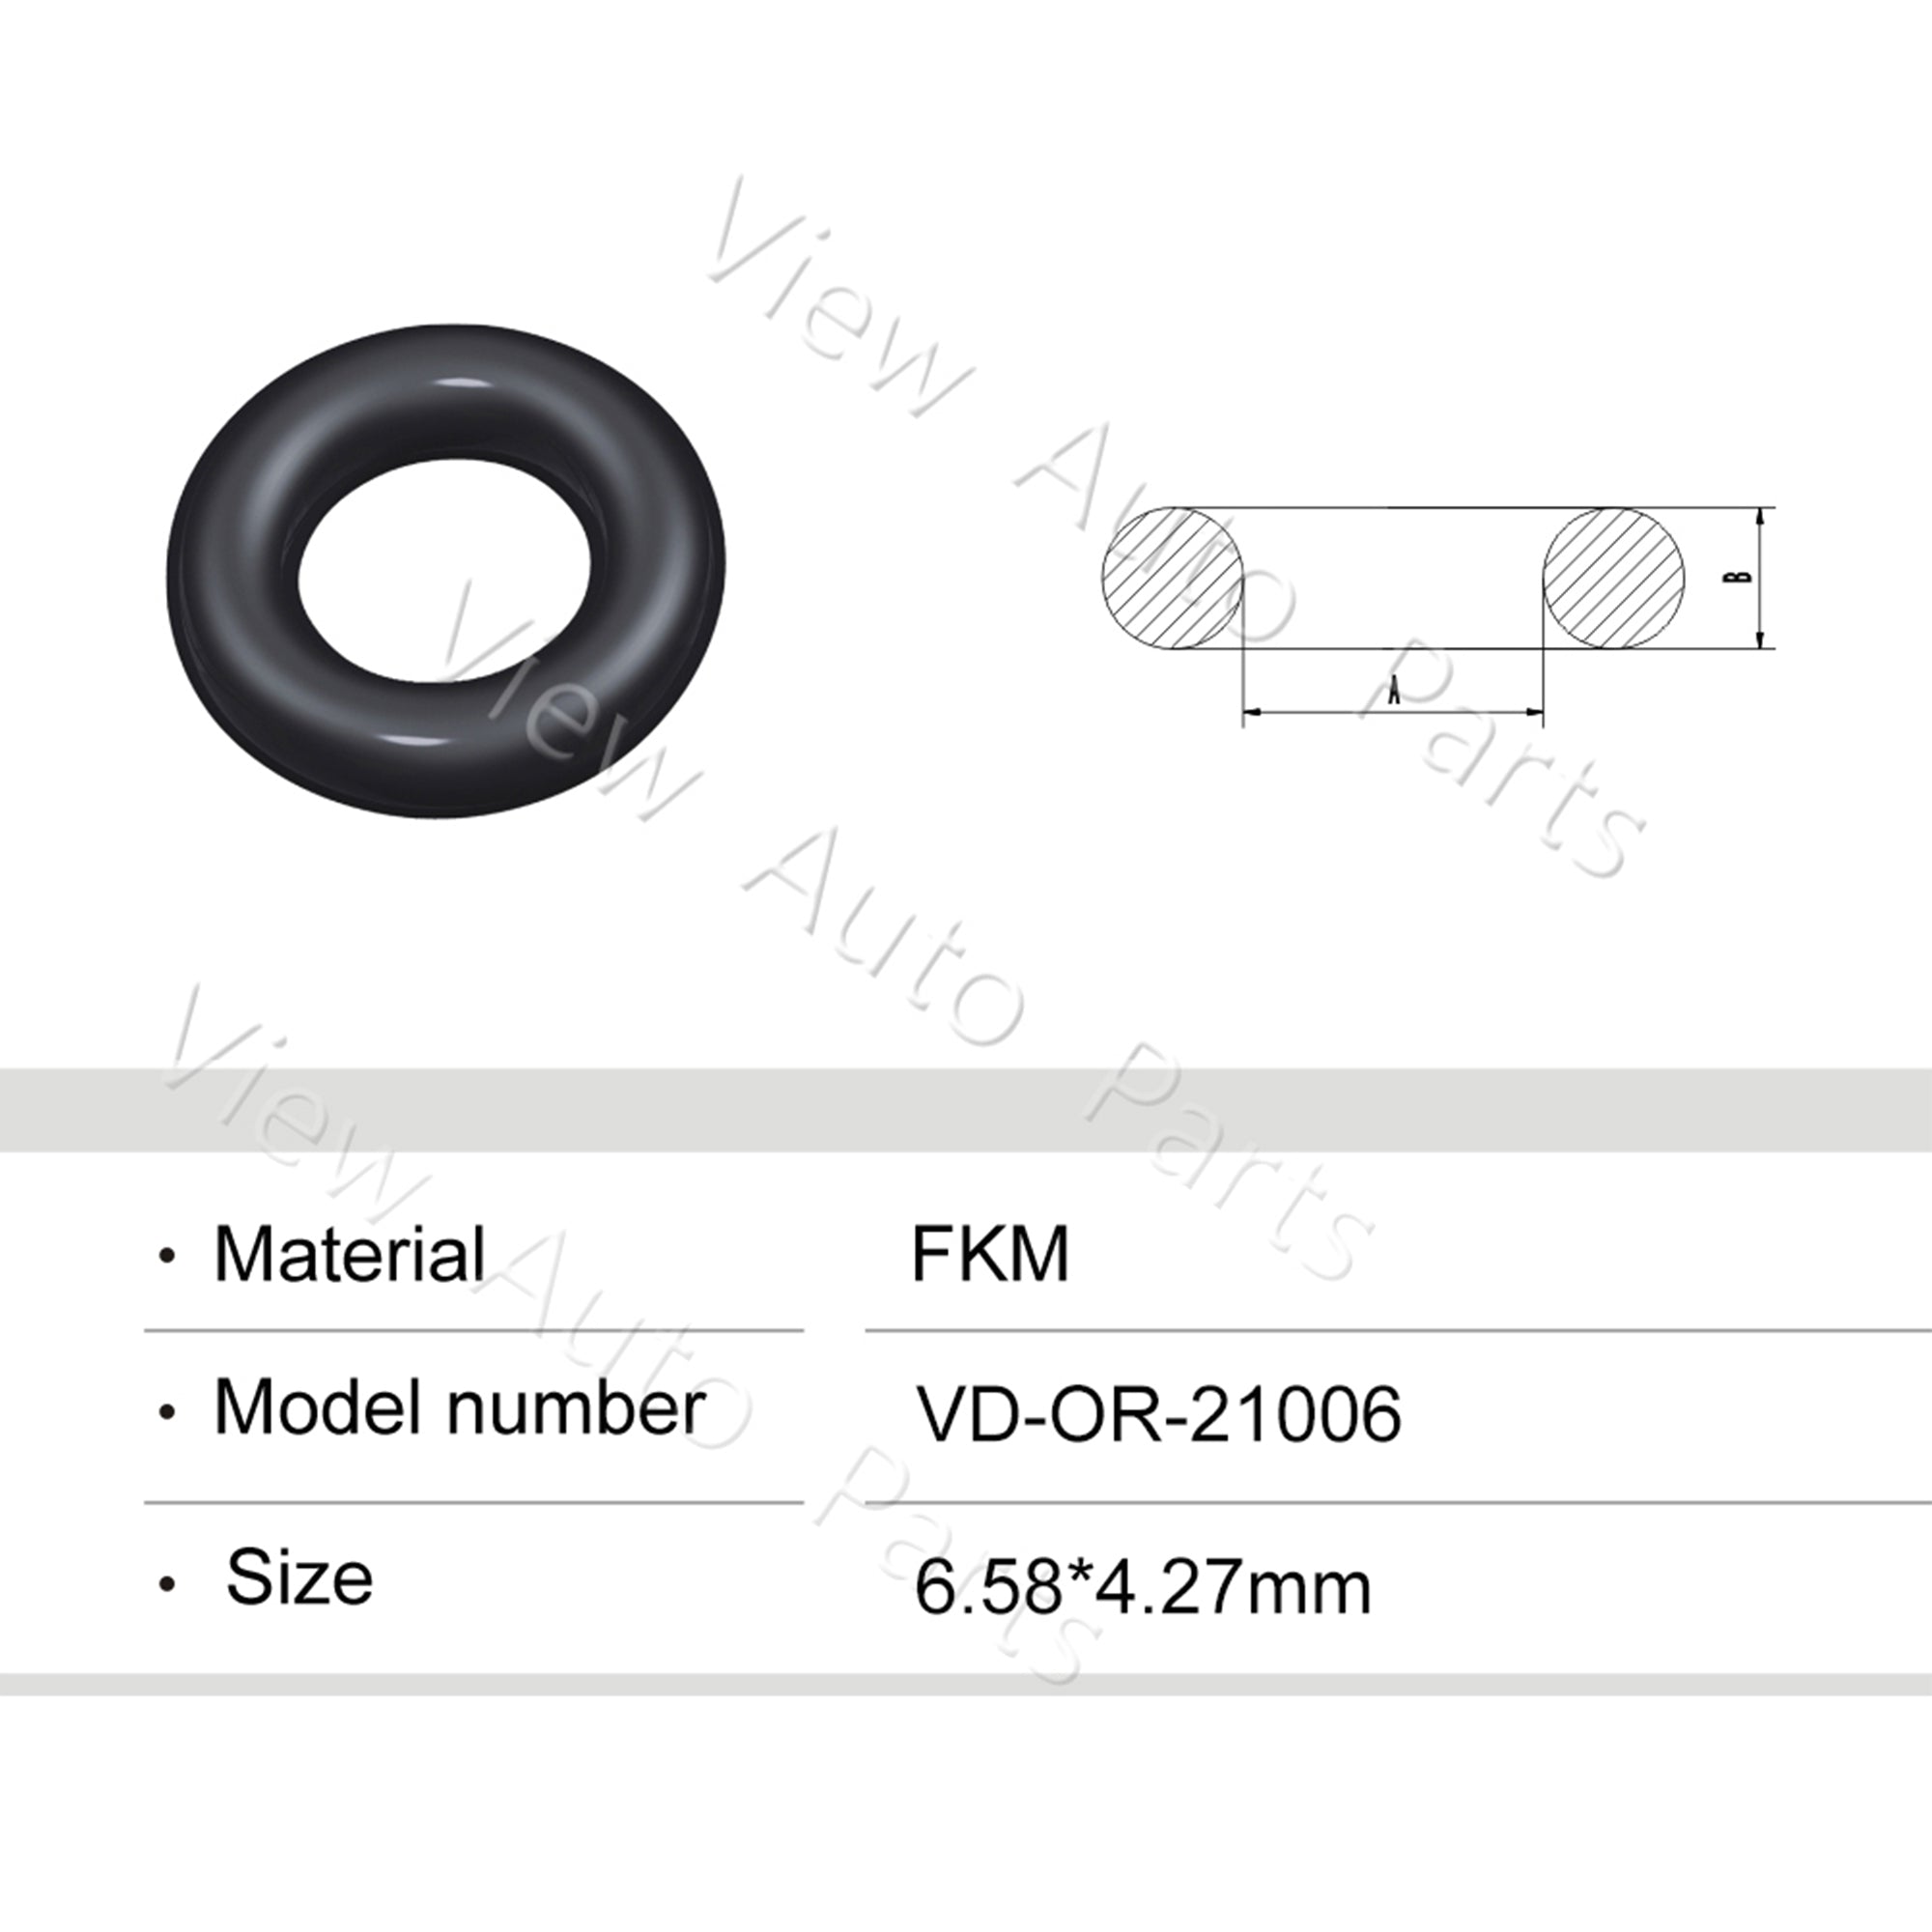 Fuel Injector Rubber Seal Orings for Fuel Injector Repair Kits FKM& Rubber Heat Resistant, Size: 6.58*4.27mm OR-21006